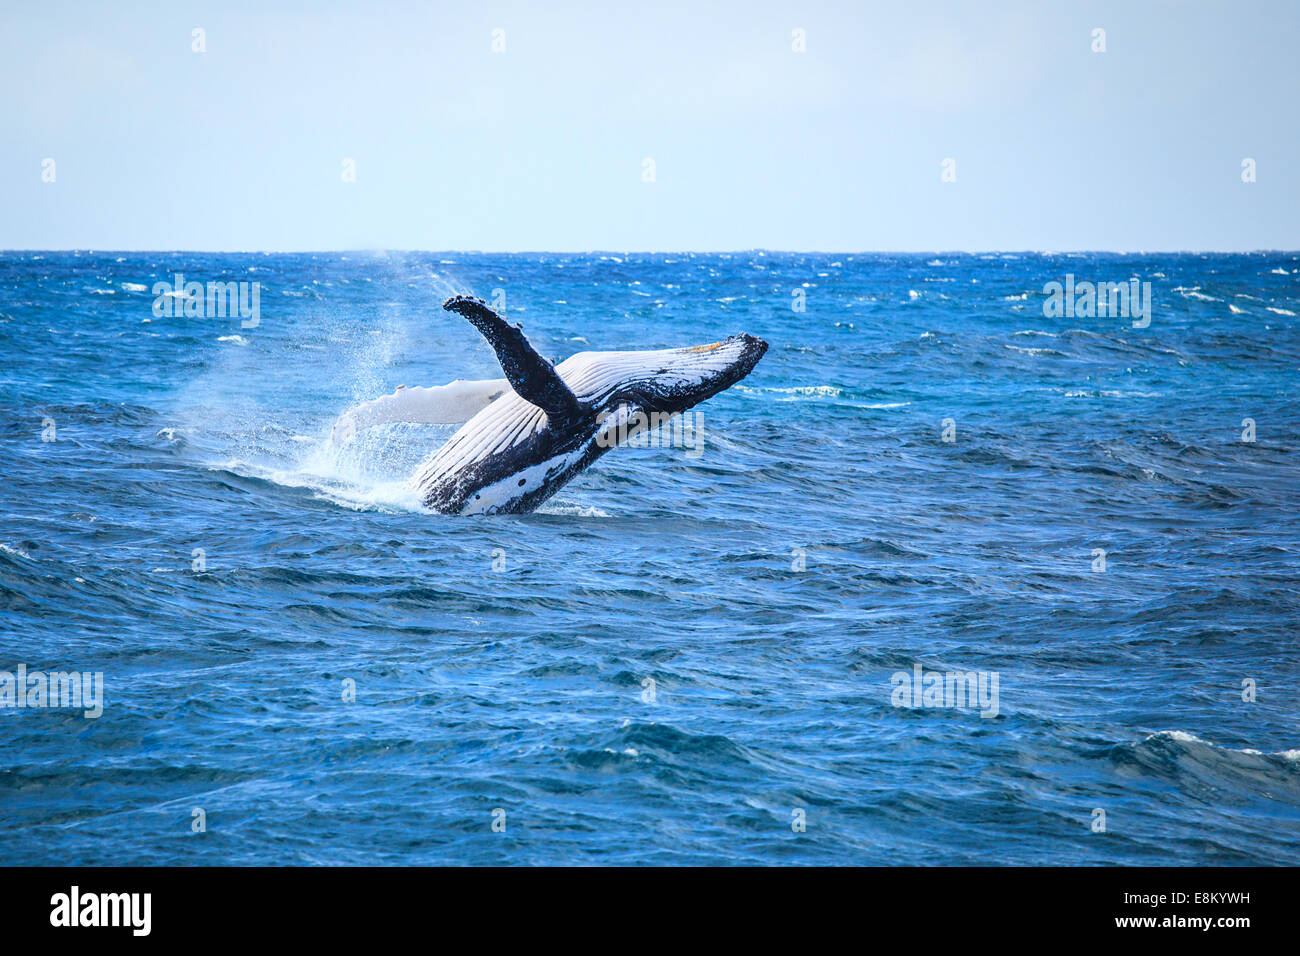 A hump back whale breaching in the Atlantic Ocean Stock Photo